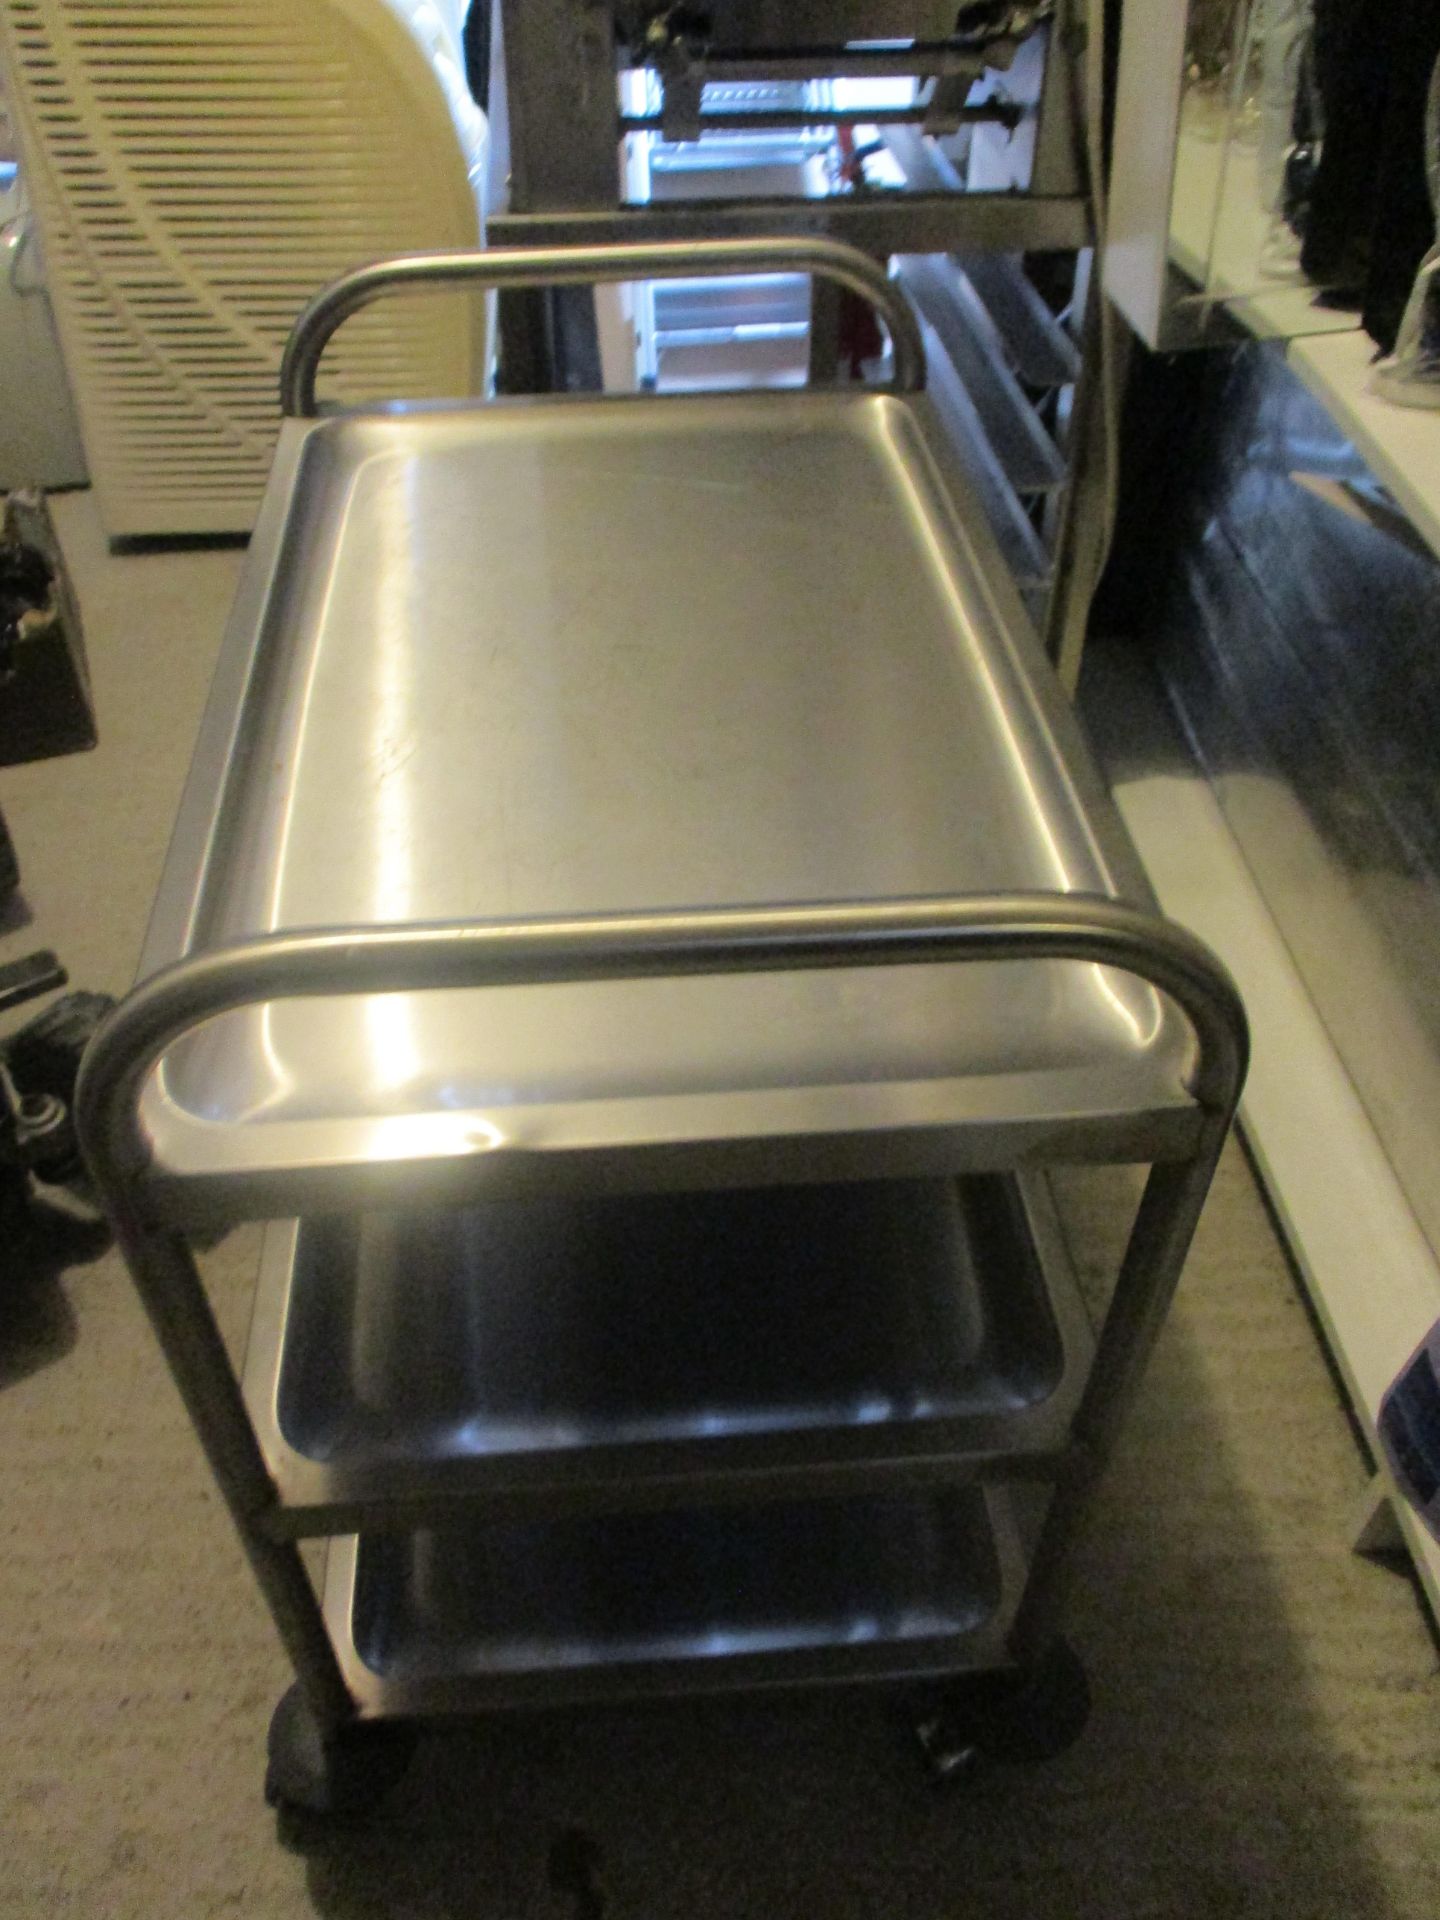 Stainless Steel 3 Tier Trolley - Image 2 of 2